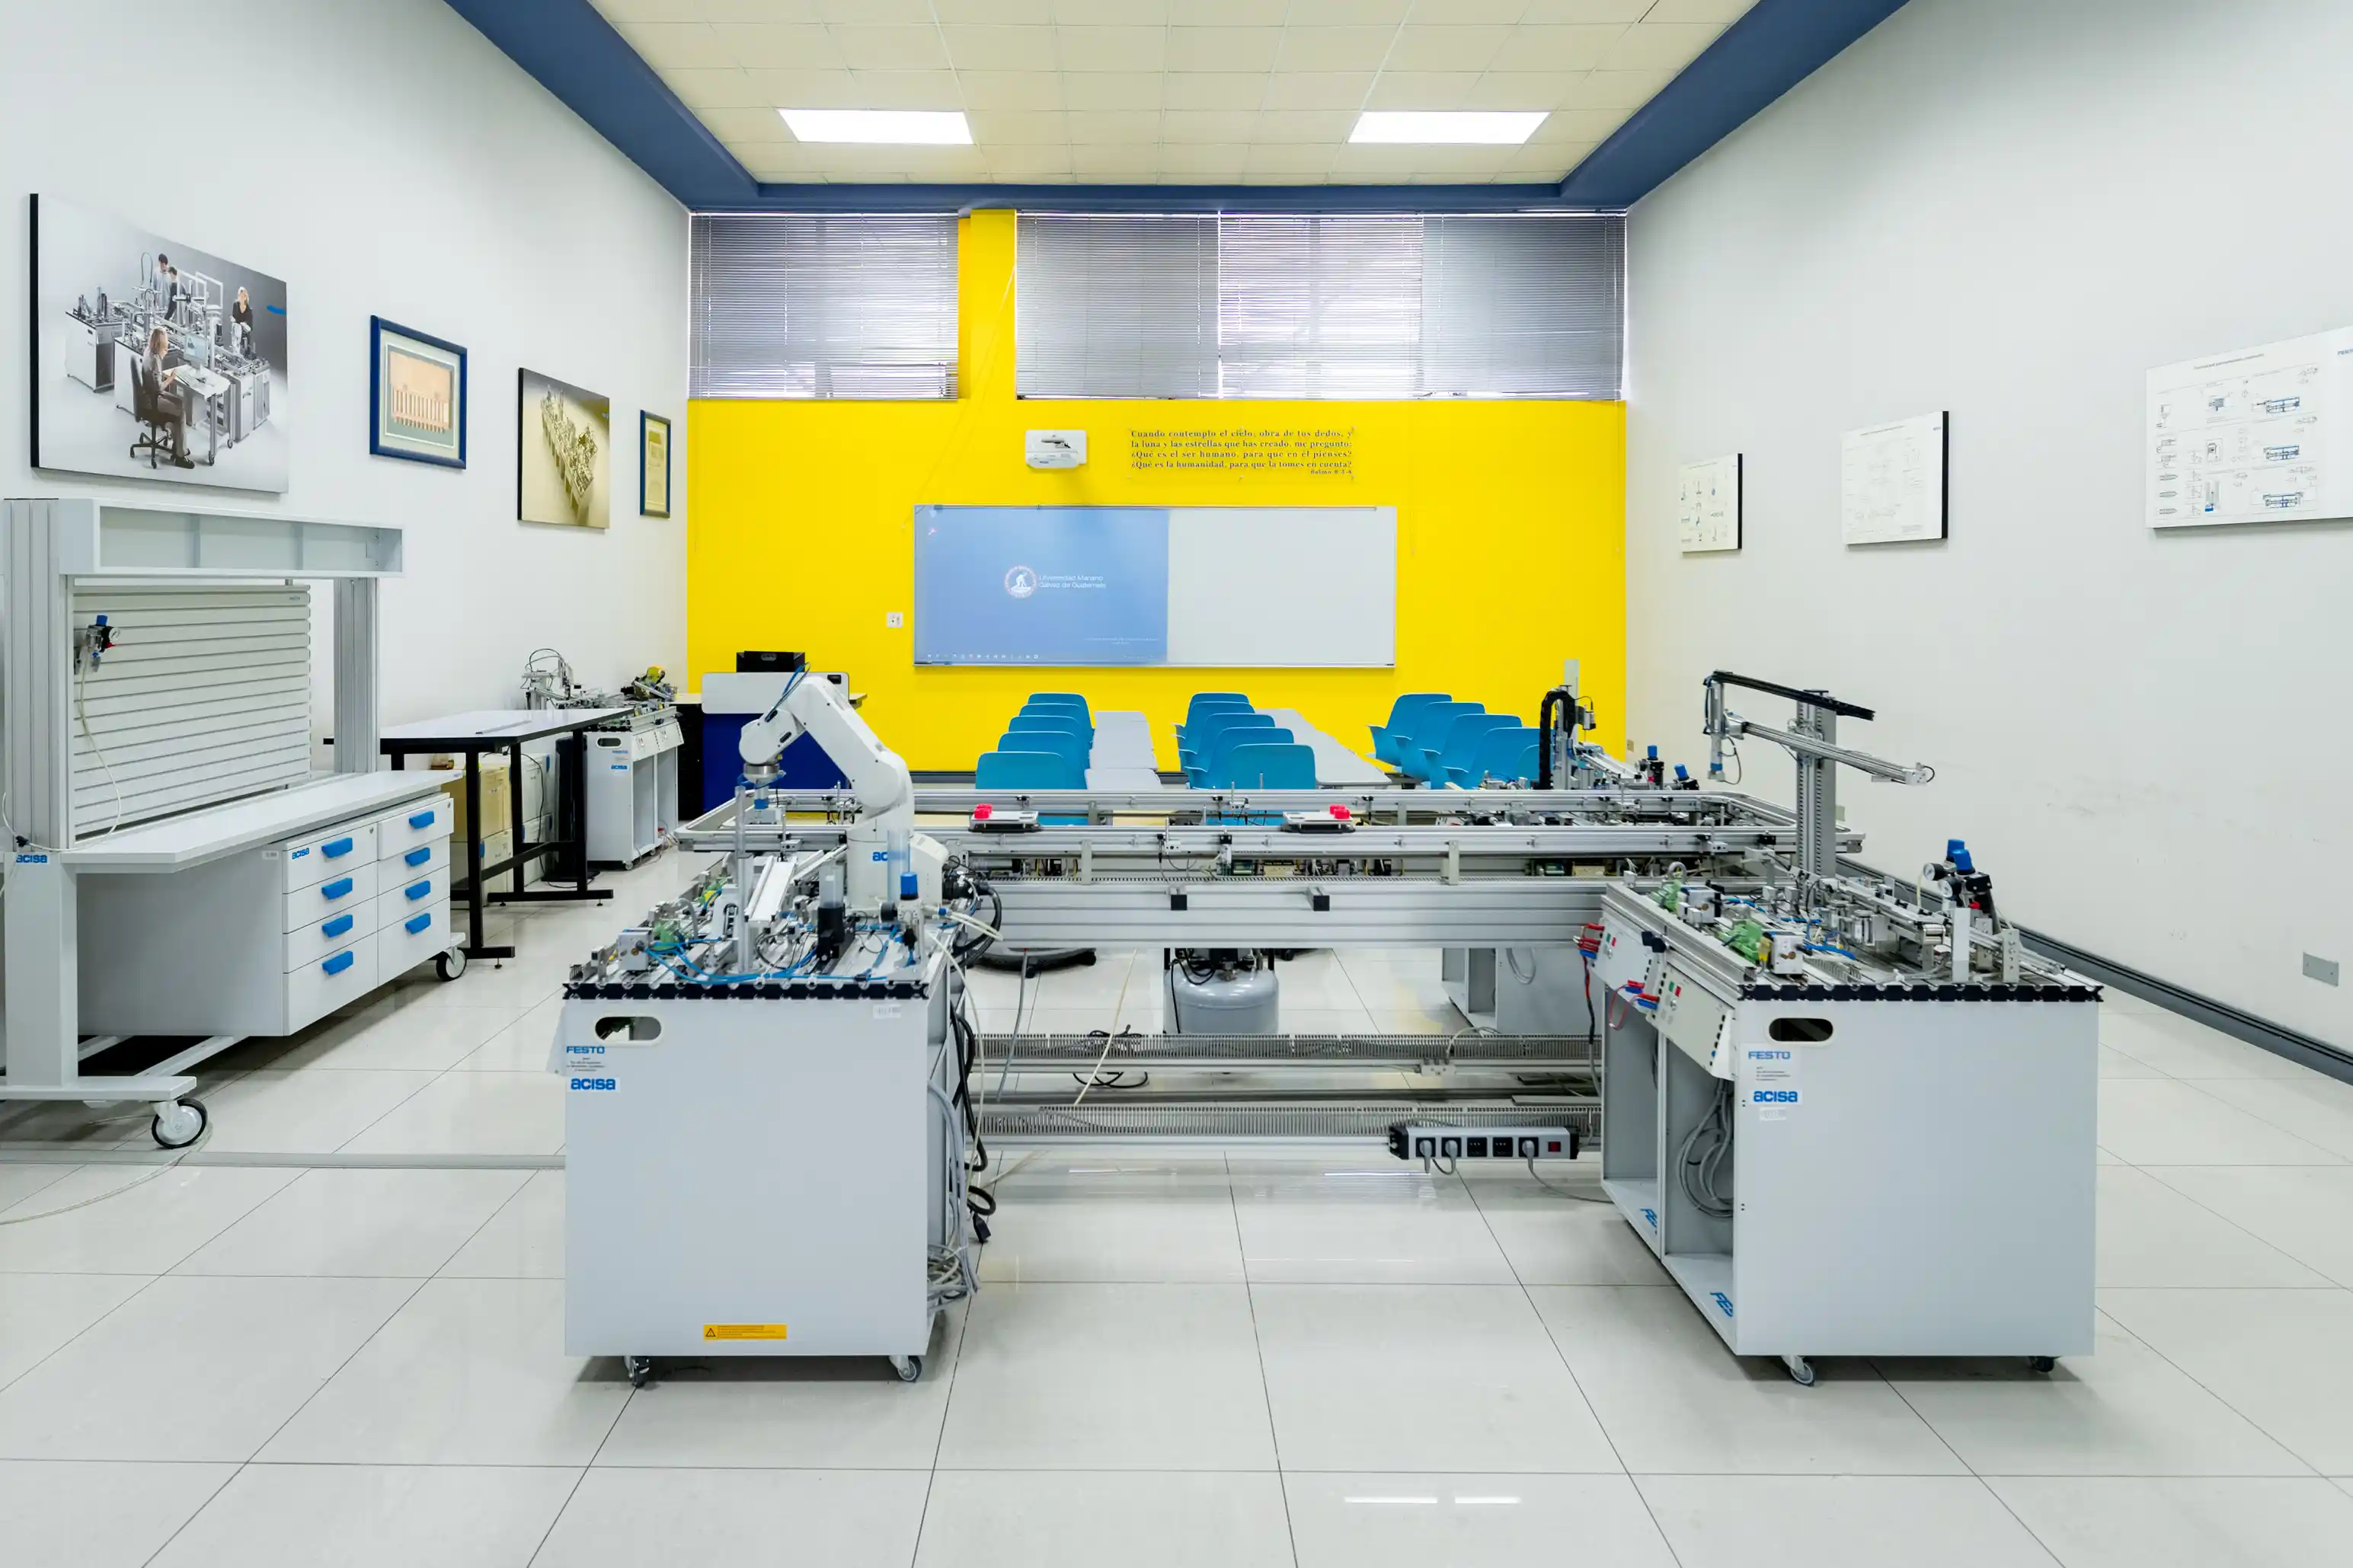 Methods, Industrial processes and automation Laboratory (MetLab), Central Campus